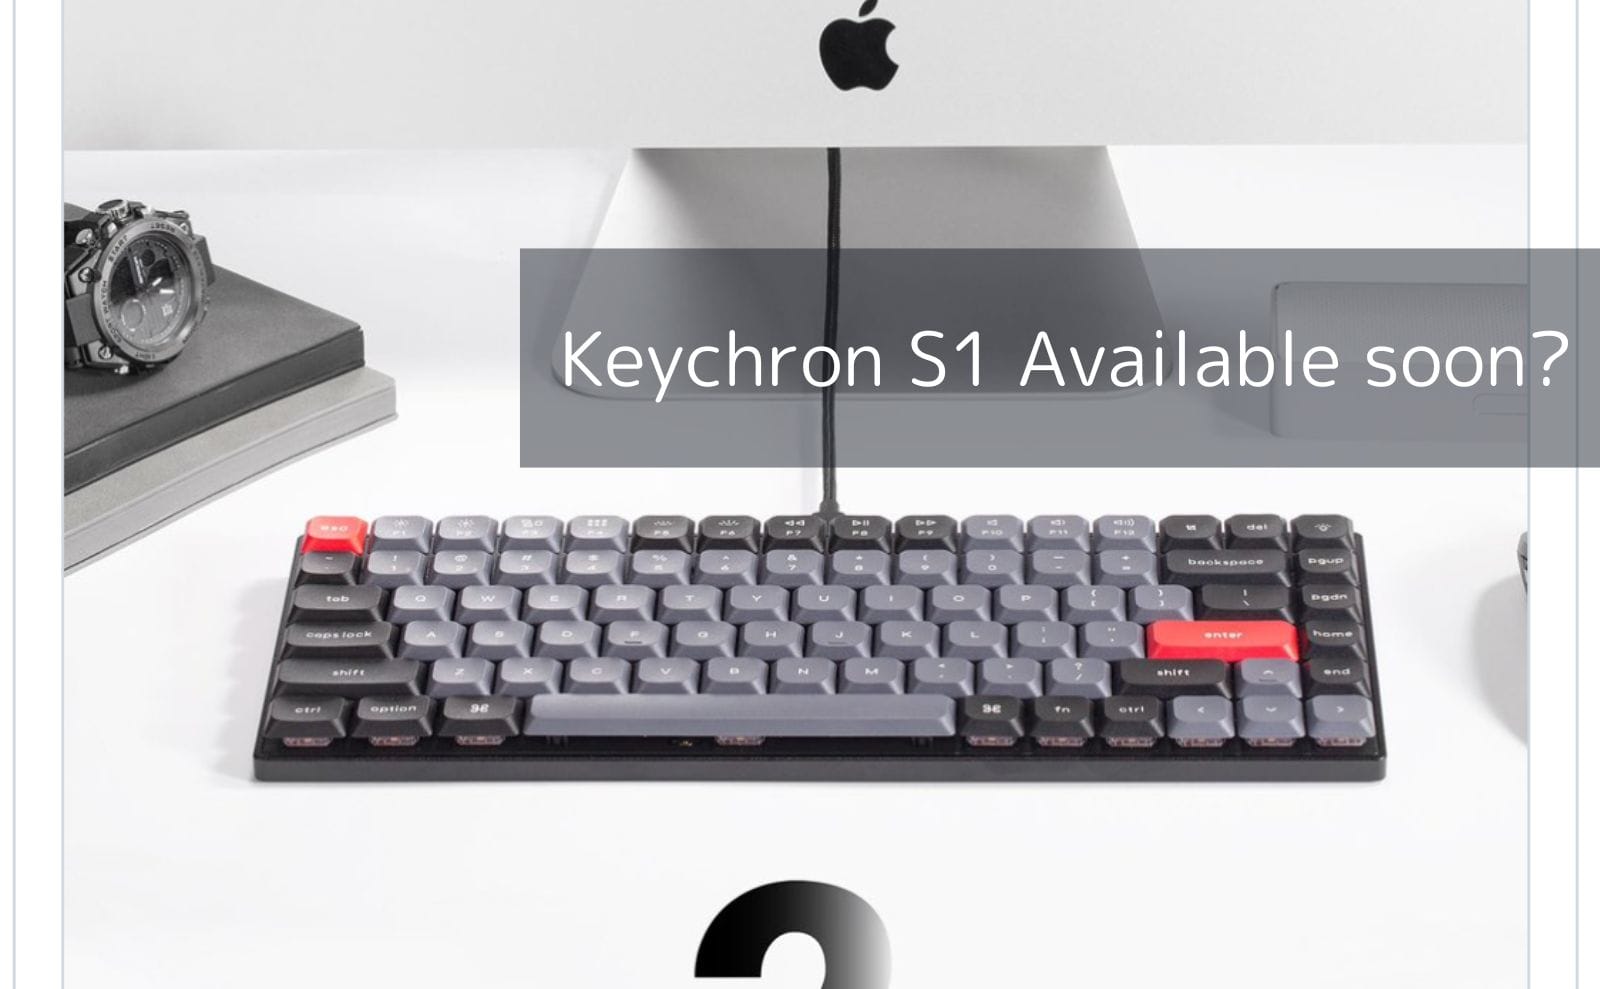 Keychron S1 is now available! What is the difference between